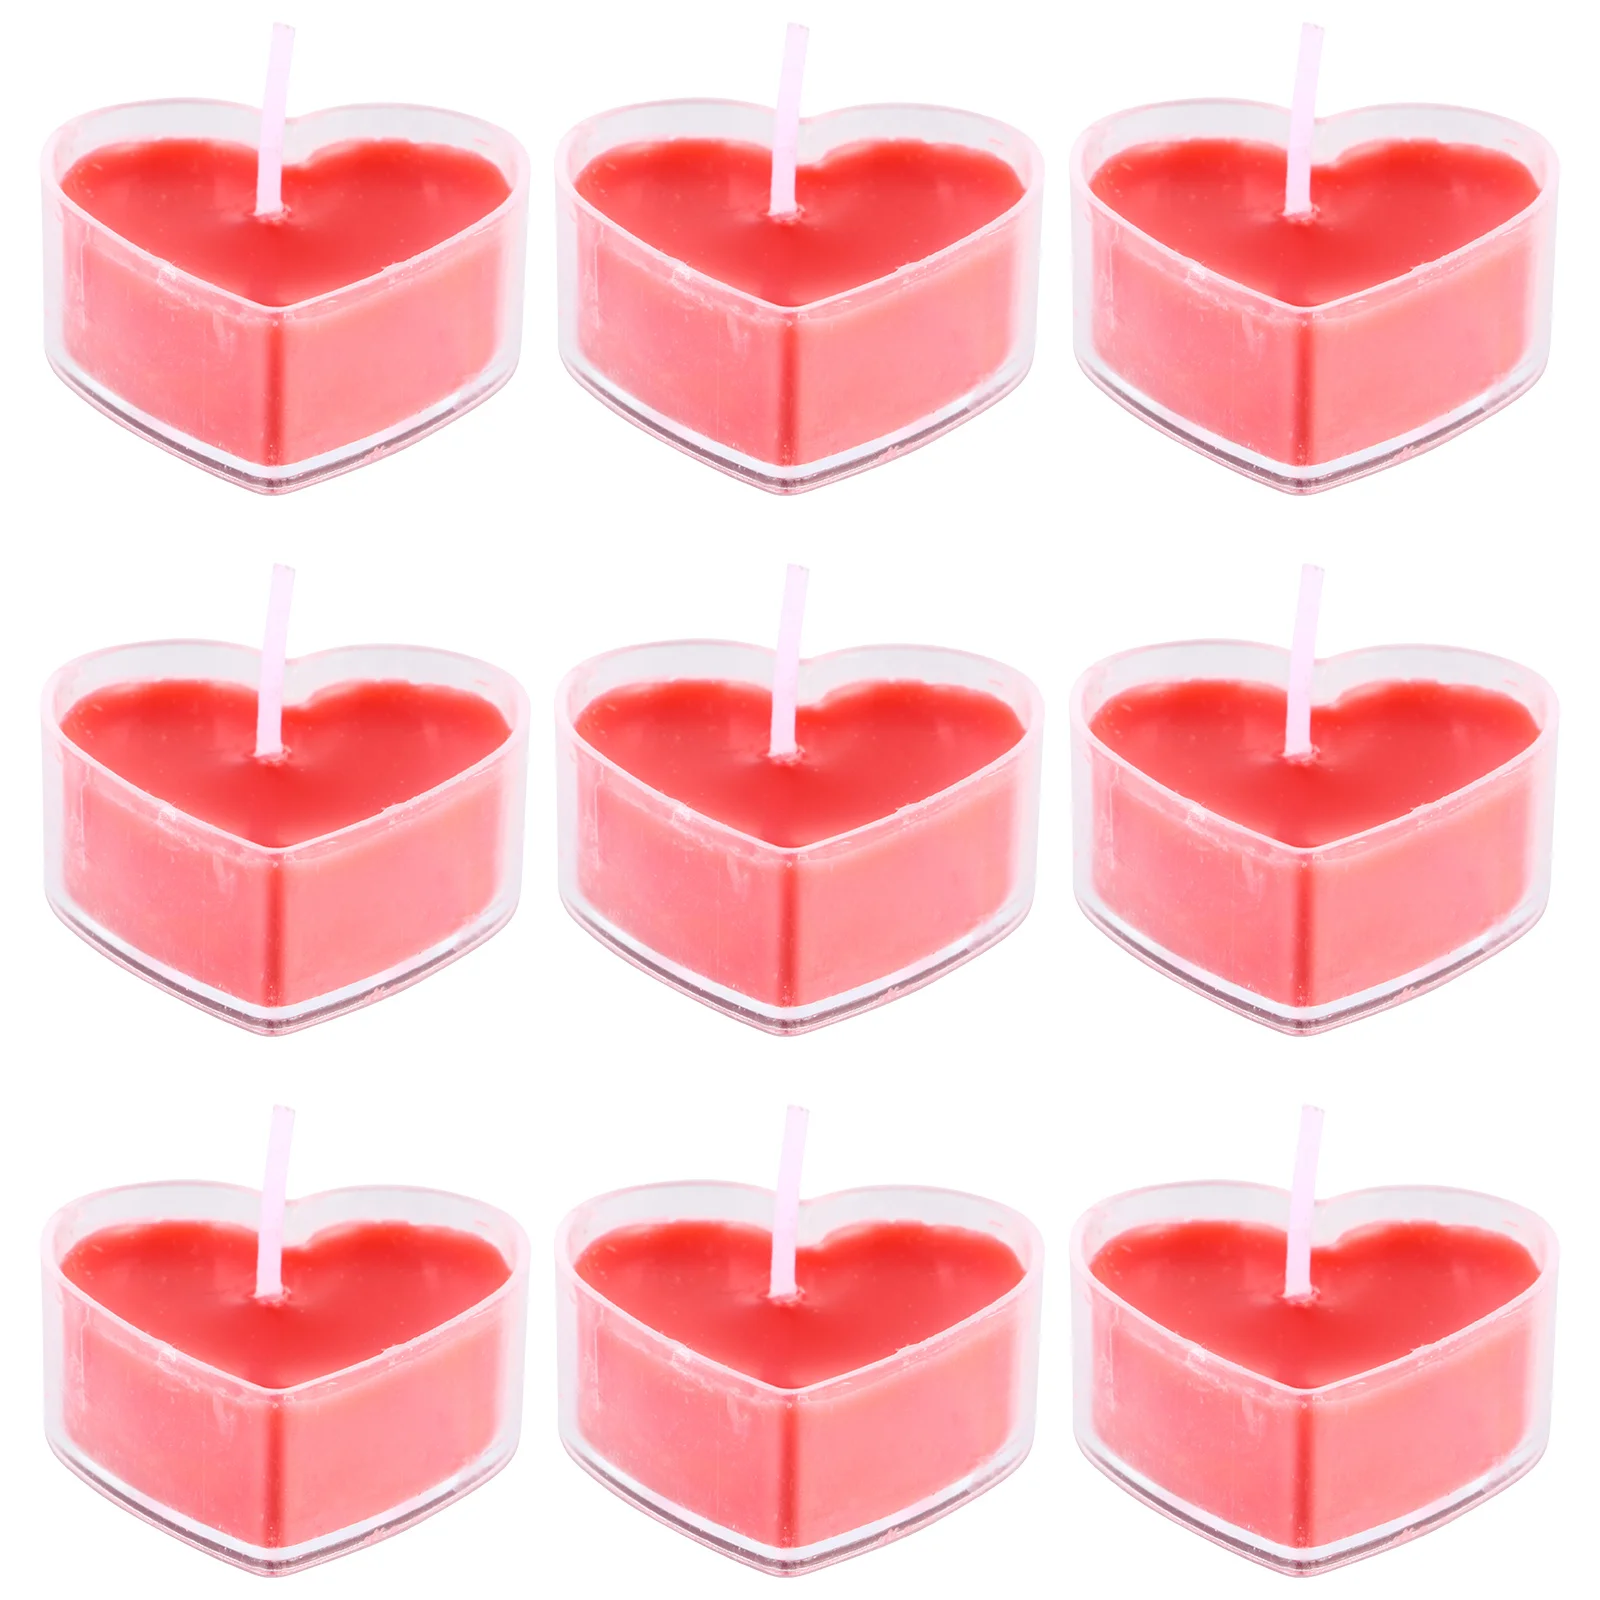 

Heart Love Scented Romantic Tealight Valentine Proposal Wedding Shape Party S Decorative Favors Lights Marriage Tea Style